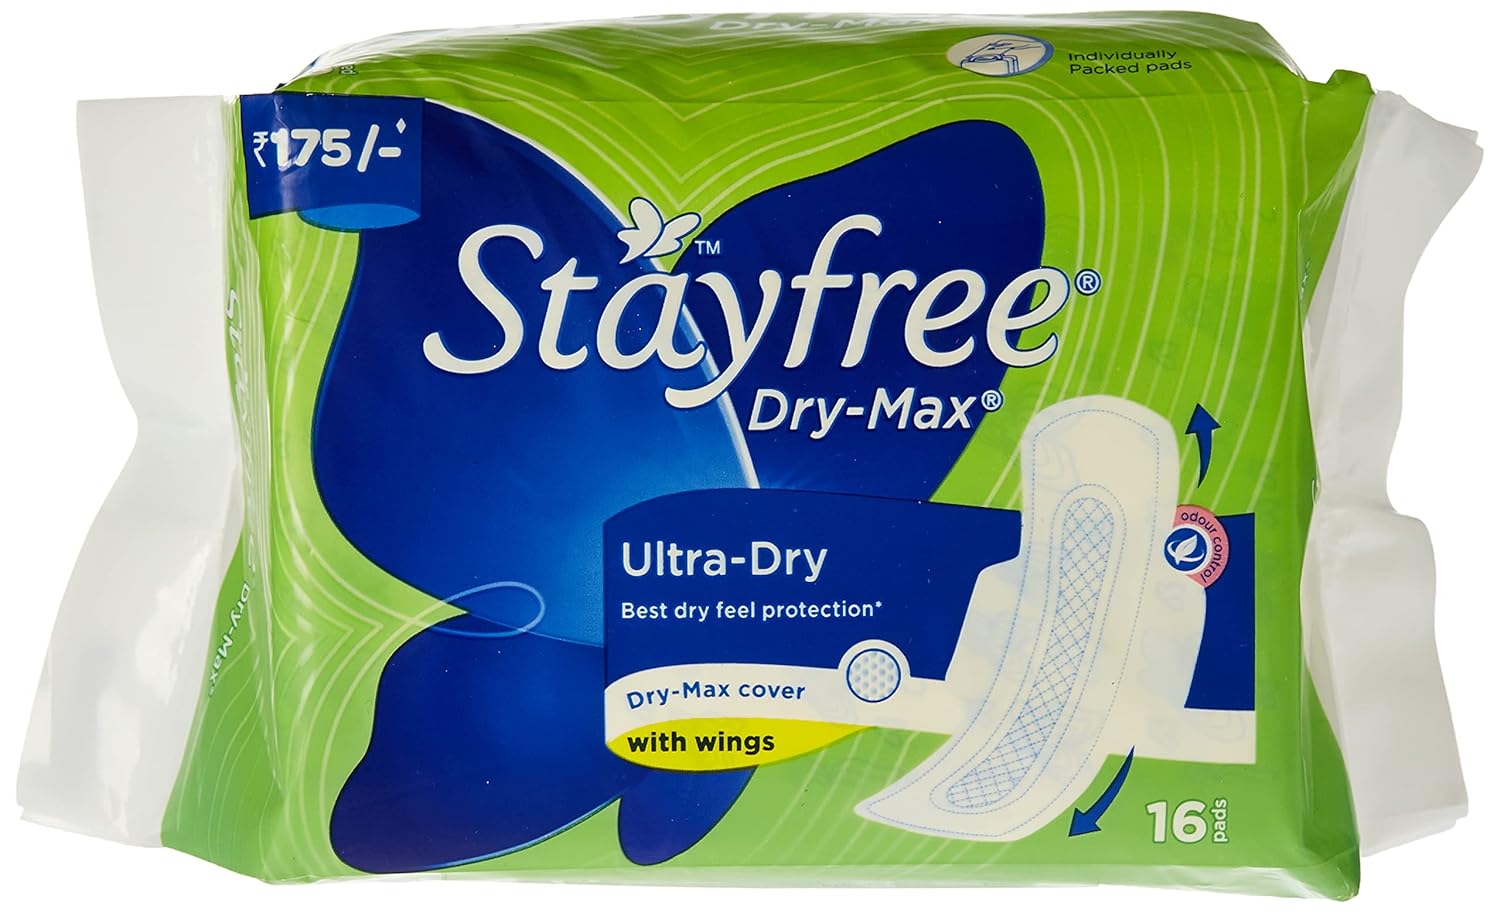 Stayfree Dry-Max Ultra-Dry Sanitary Pads with Wings - 16 Pads